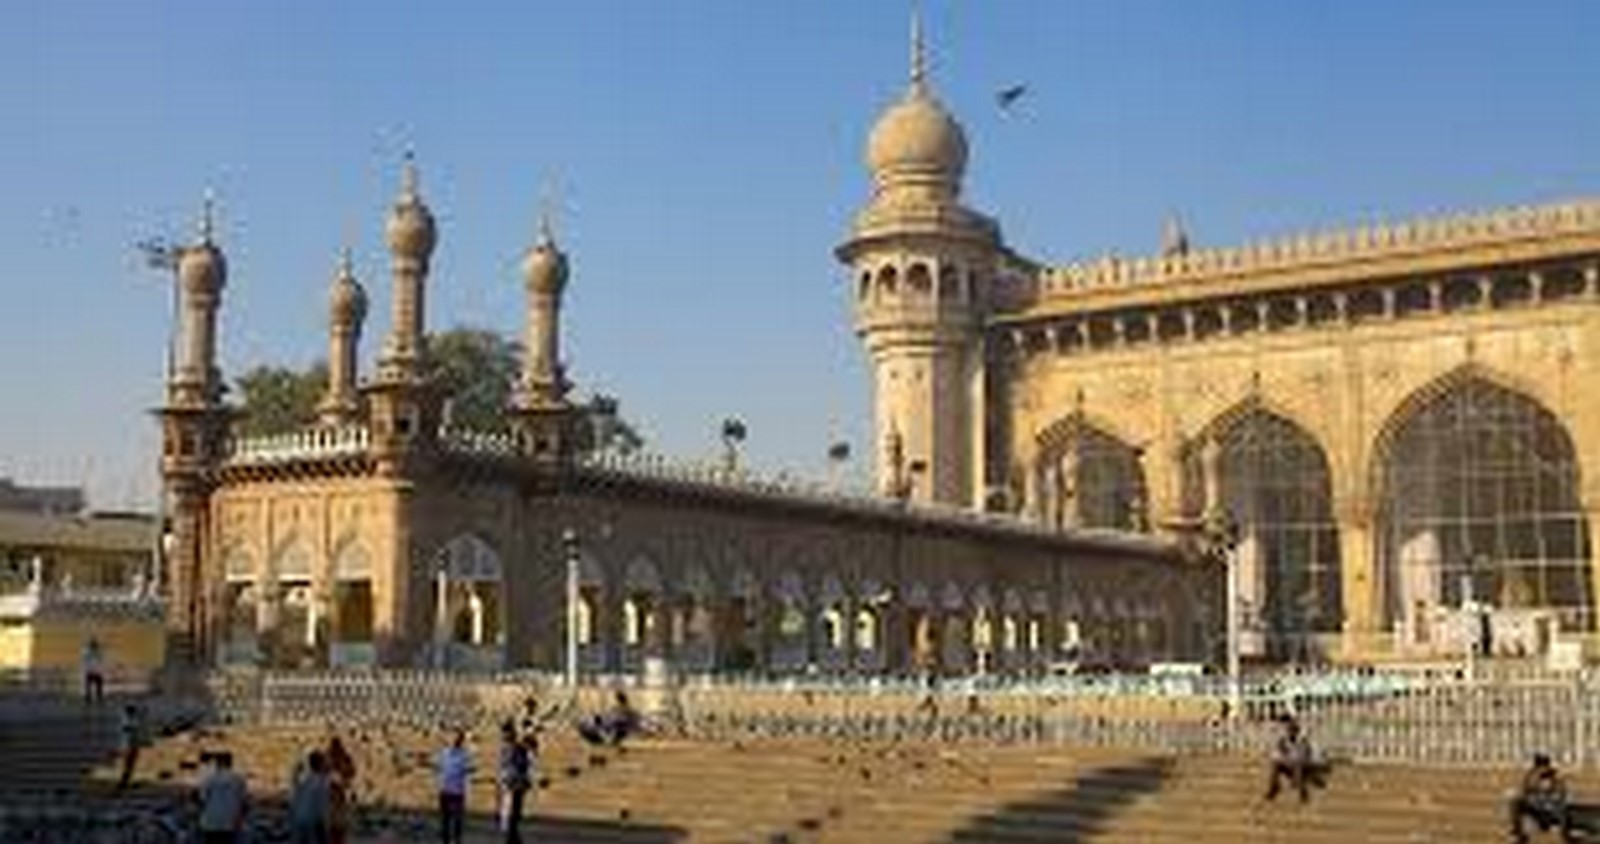 10 Indian structures with islamic influence in their design